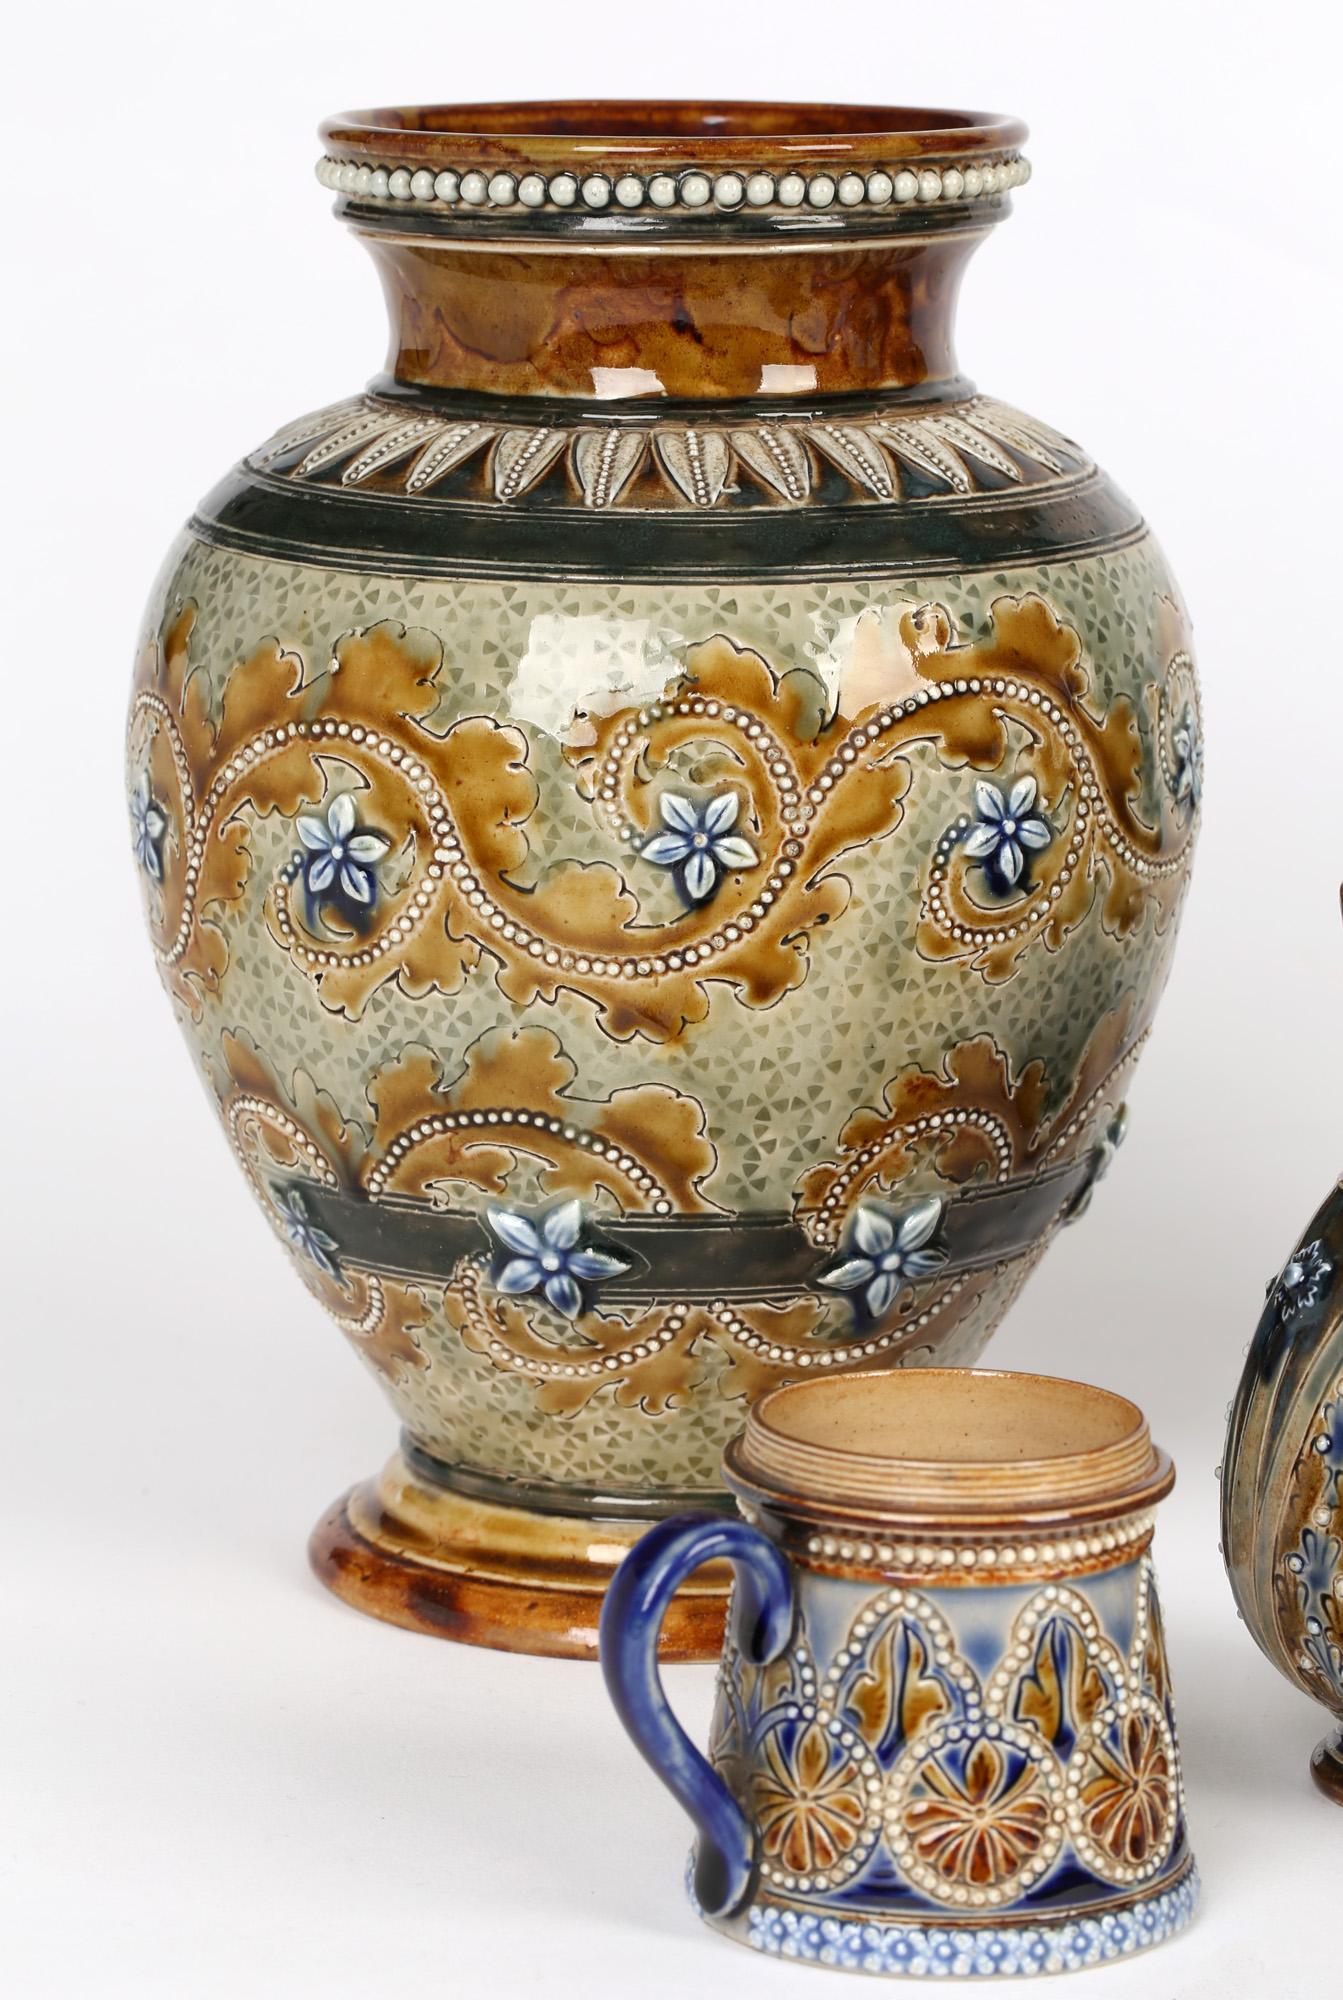 Hand-Painted Collection of 19th Century Art Pottery